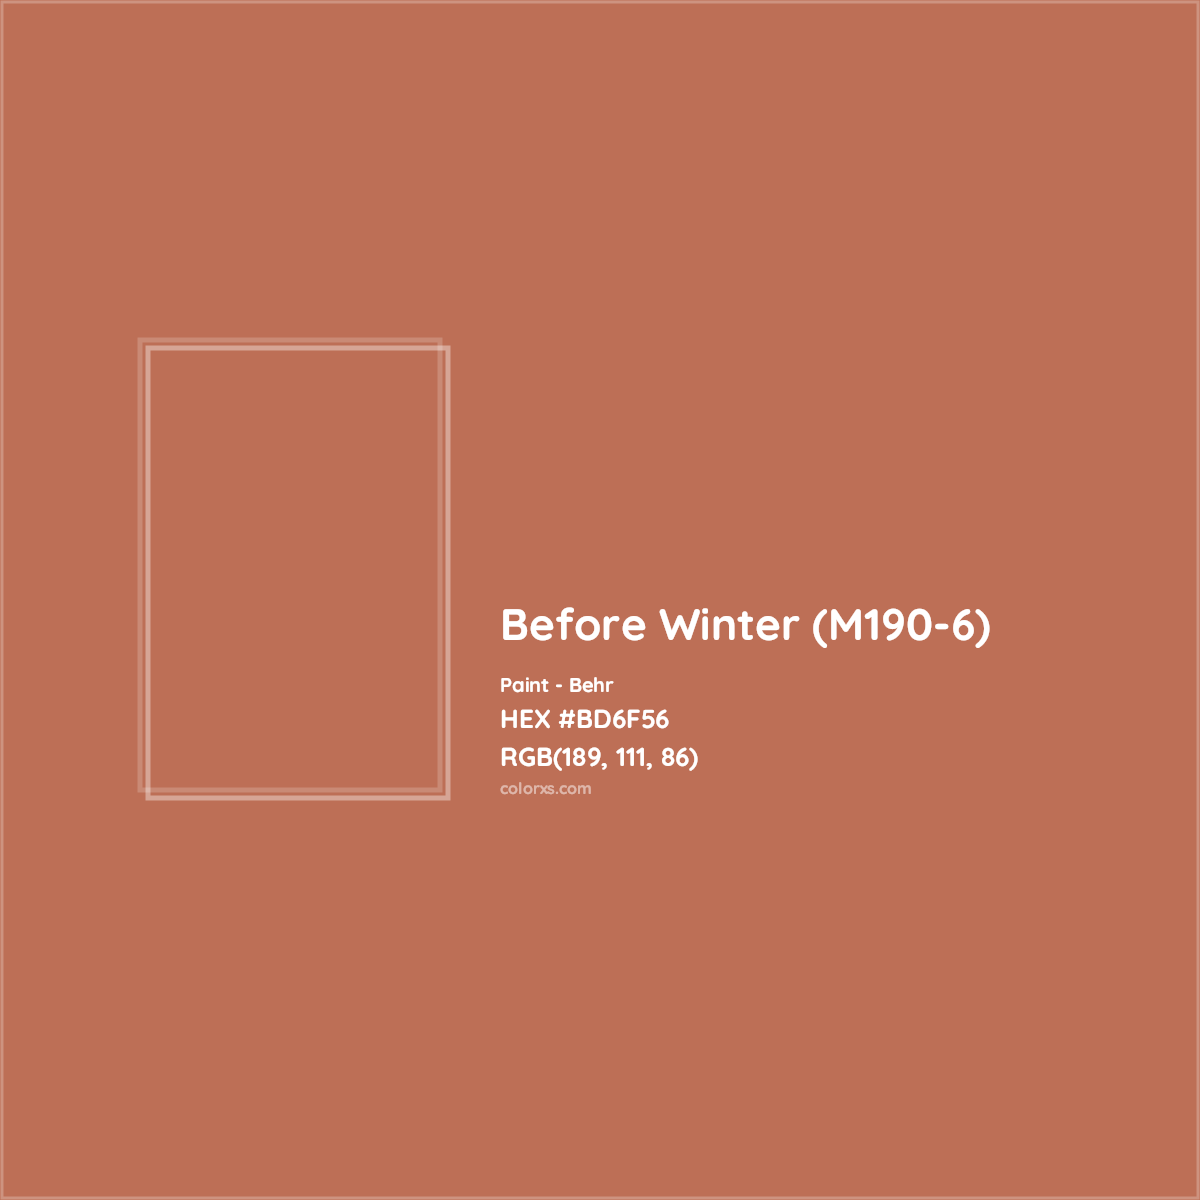 HEX #BD6F56 Before Winter (M190-6) Paint Behr - Color Code